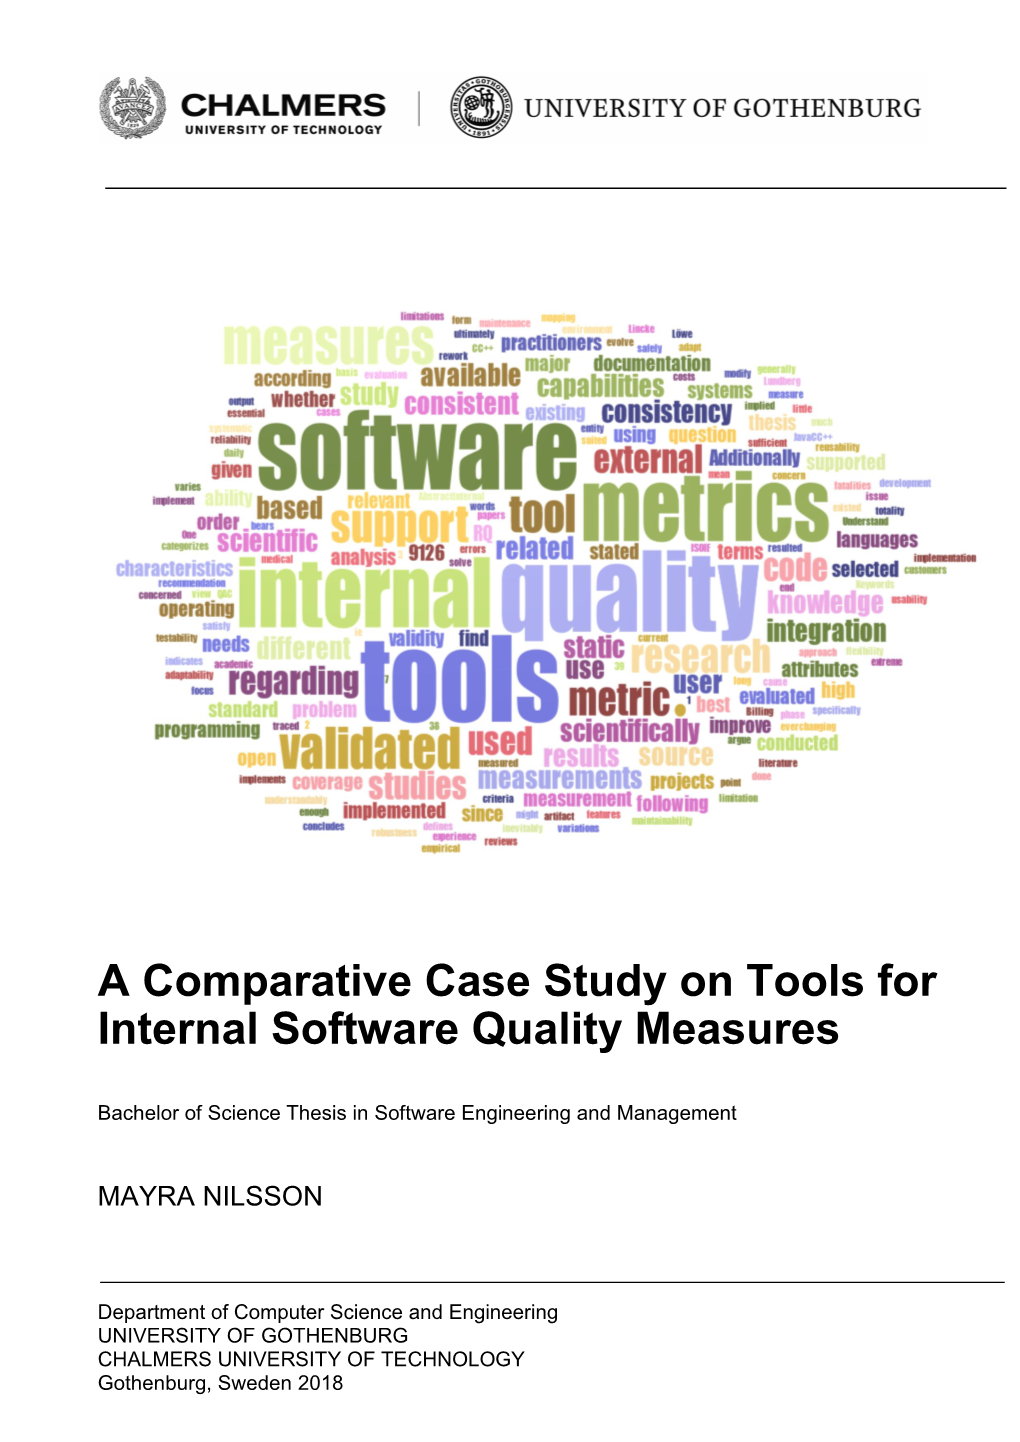 A Comparative Case Study on Tools for Internal Software Quality Measures